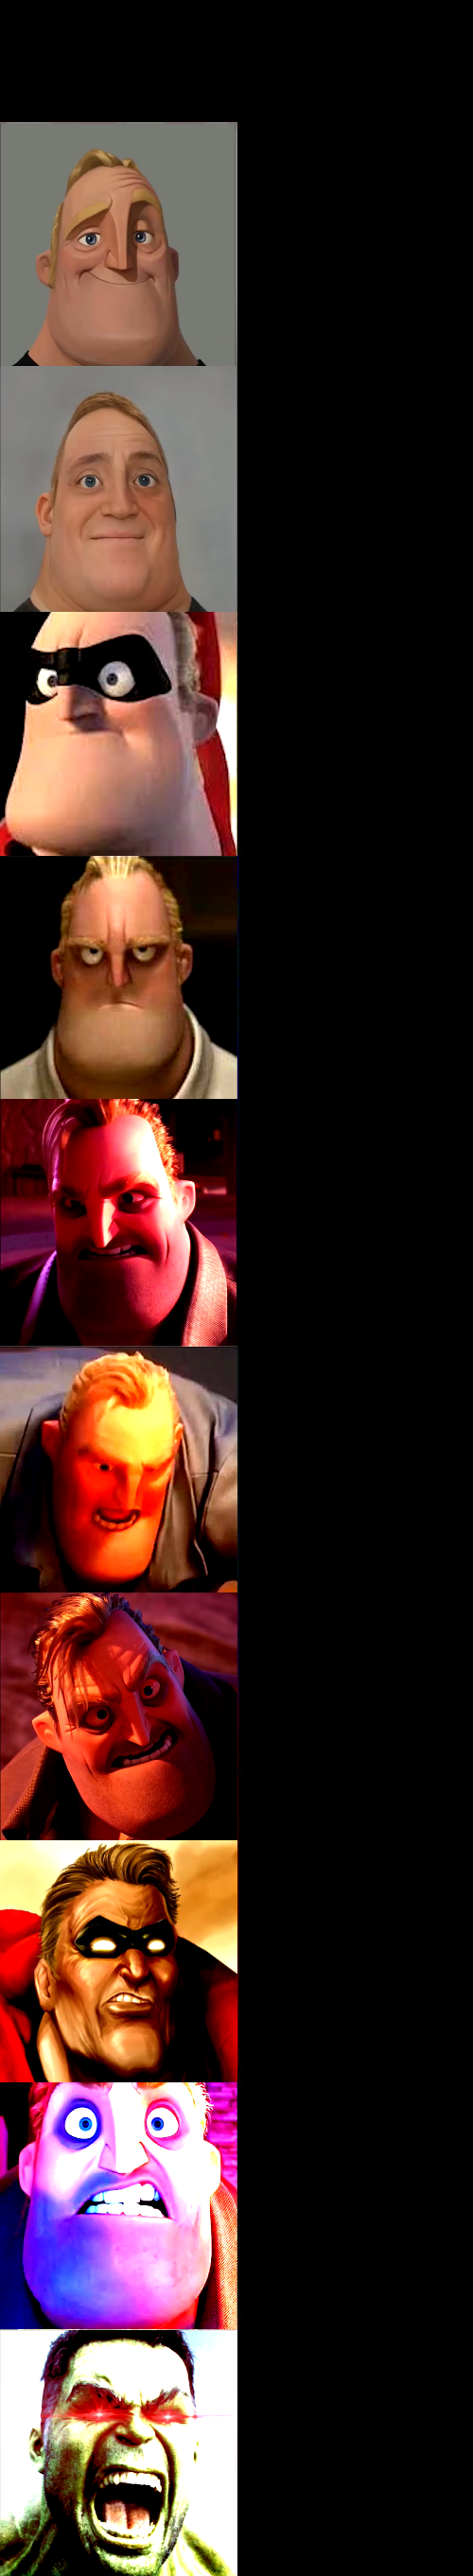 High Quality Mr. Incredible Becoming Angry Blank Meme Template